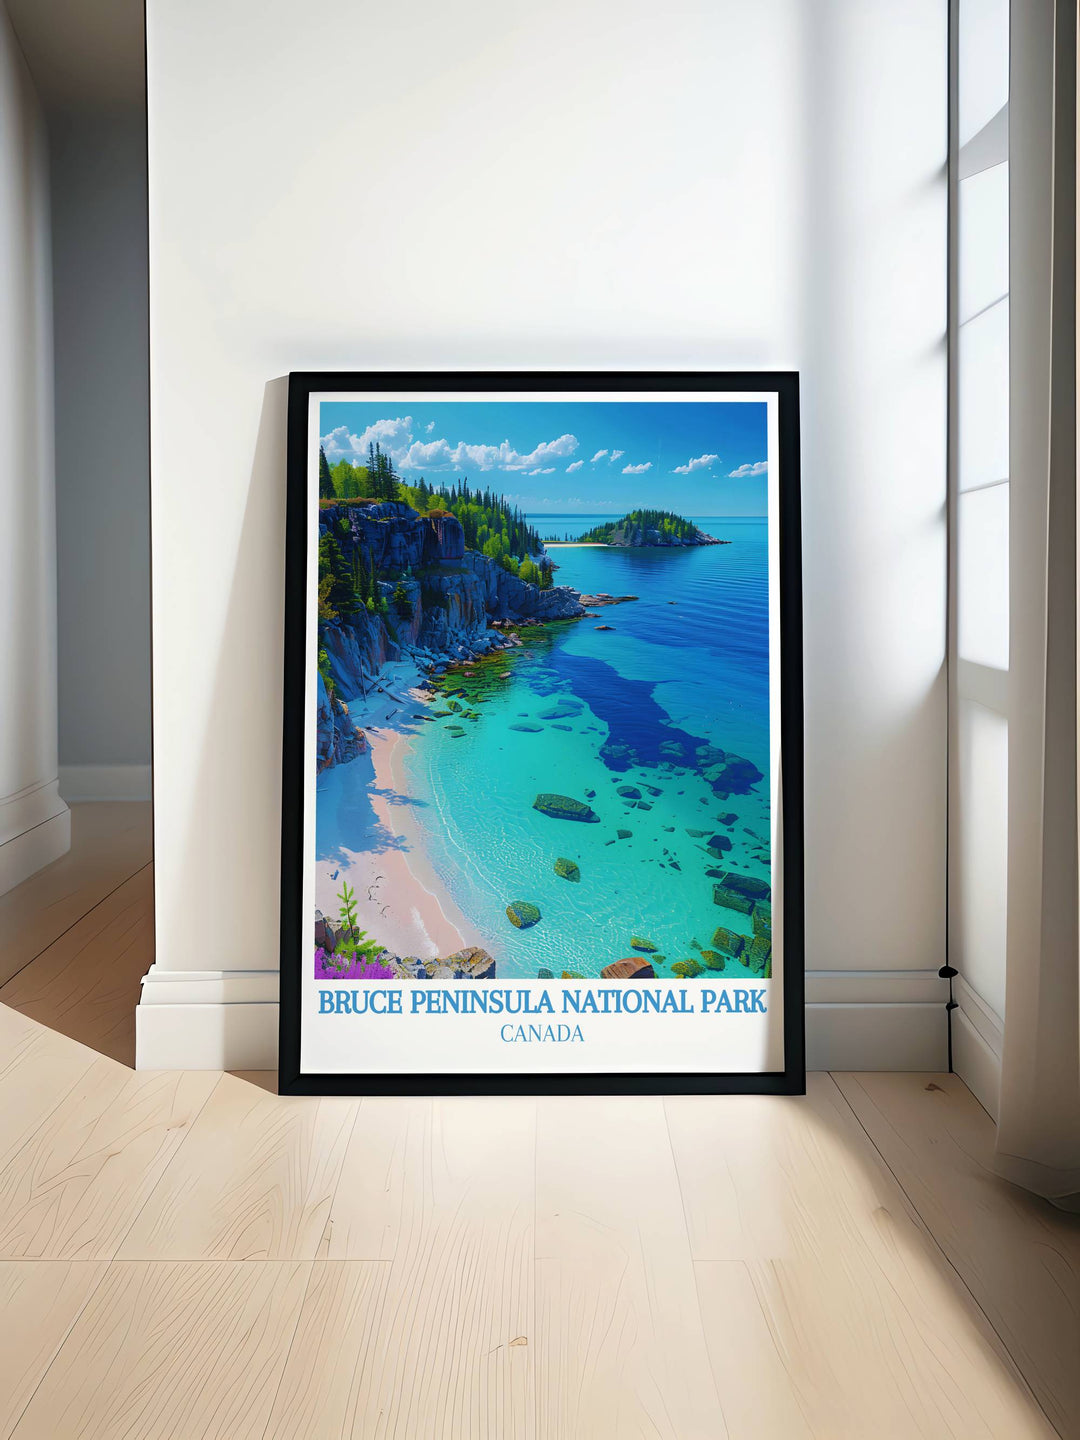 The Flowerpot Island Travel Print showcases the natural beauty of Bruce Peninsula National Park featuring the iconic flowerpot shaped rock formations and clear blue waters perfect for nature lovers and travel enthusiasts looking to bring the outdoors inside